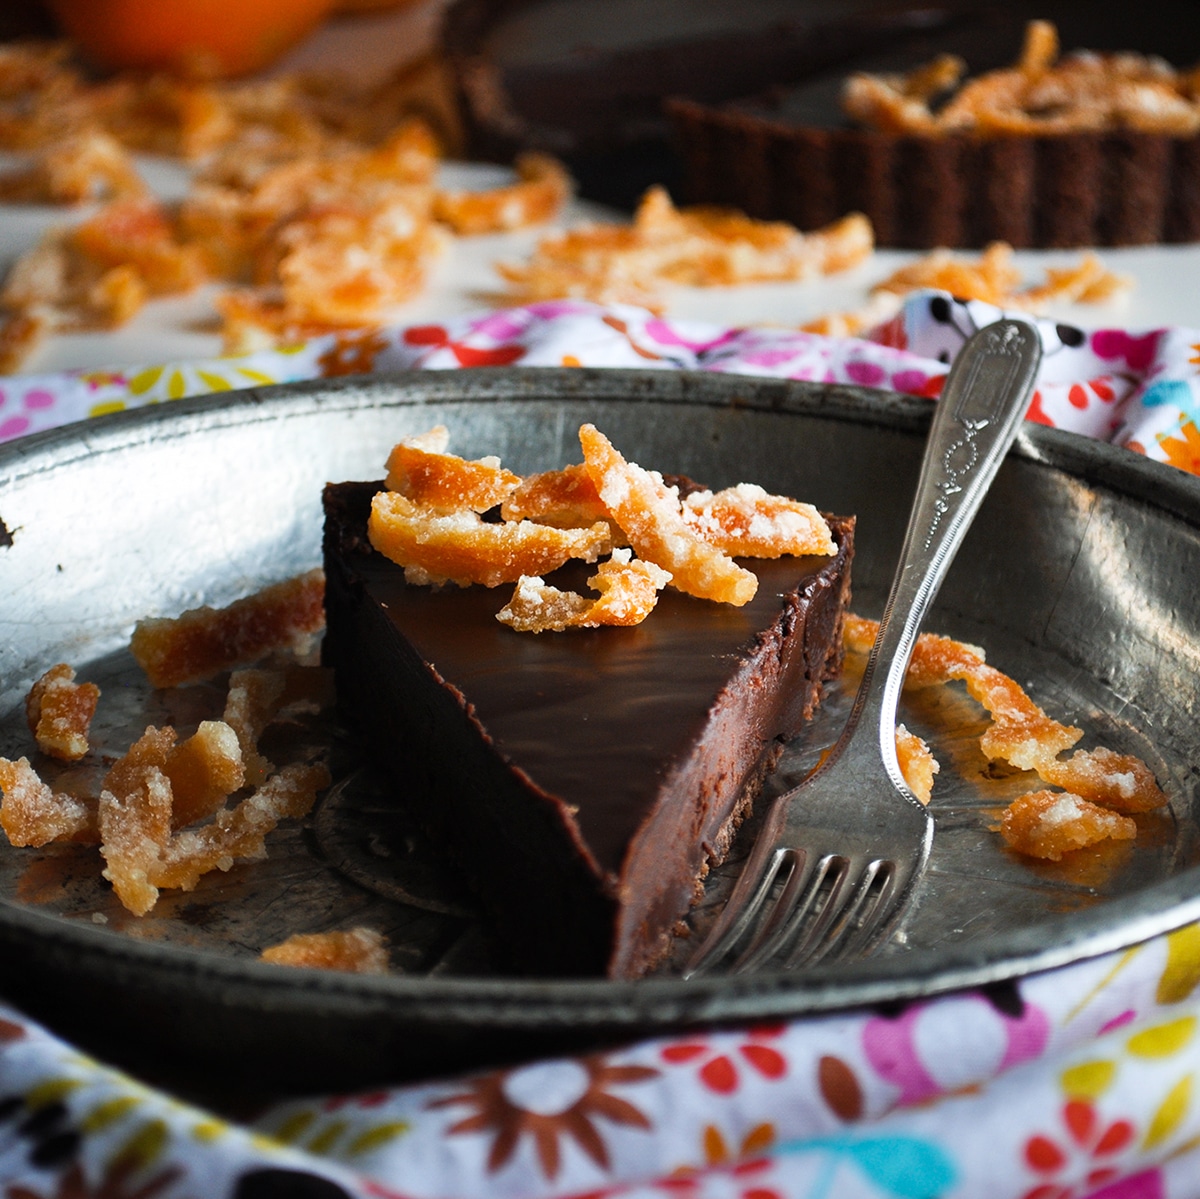 A slice of chocolate orange truffle tart decorated with candied orange peel on a tin plate.